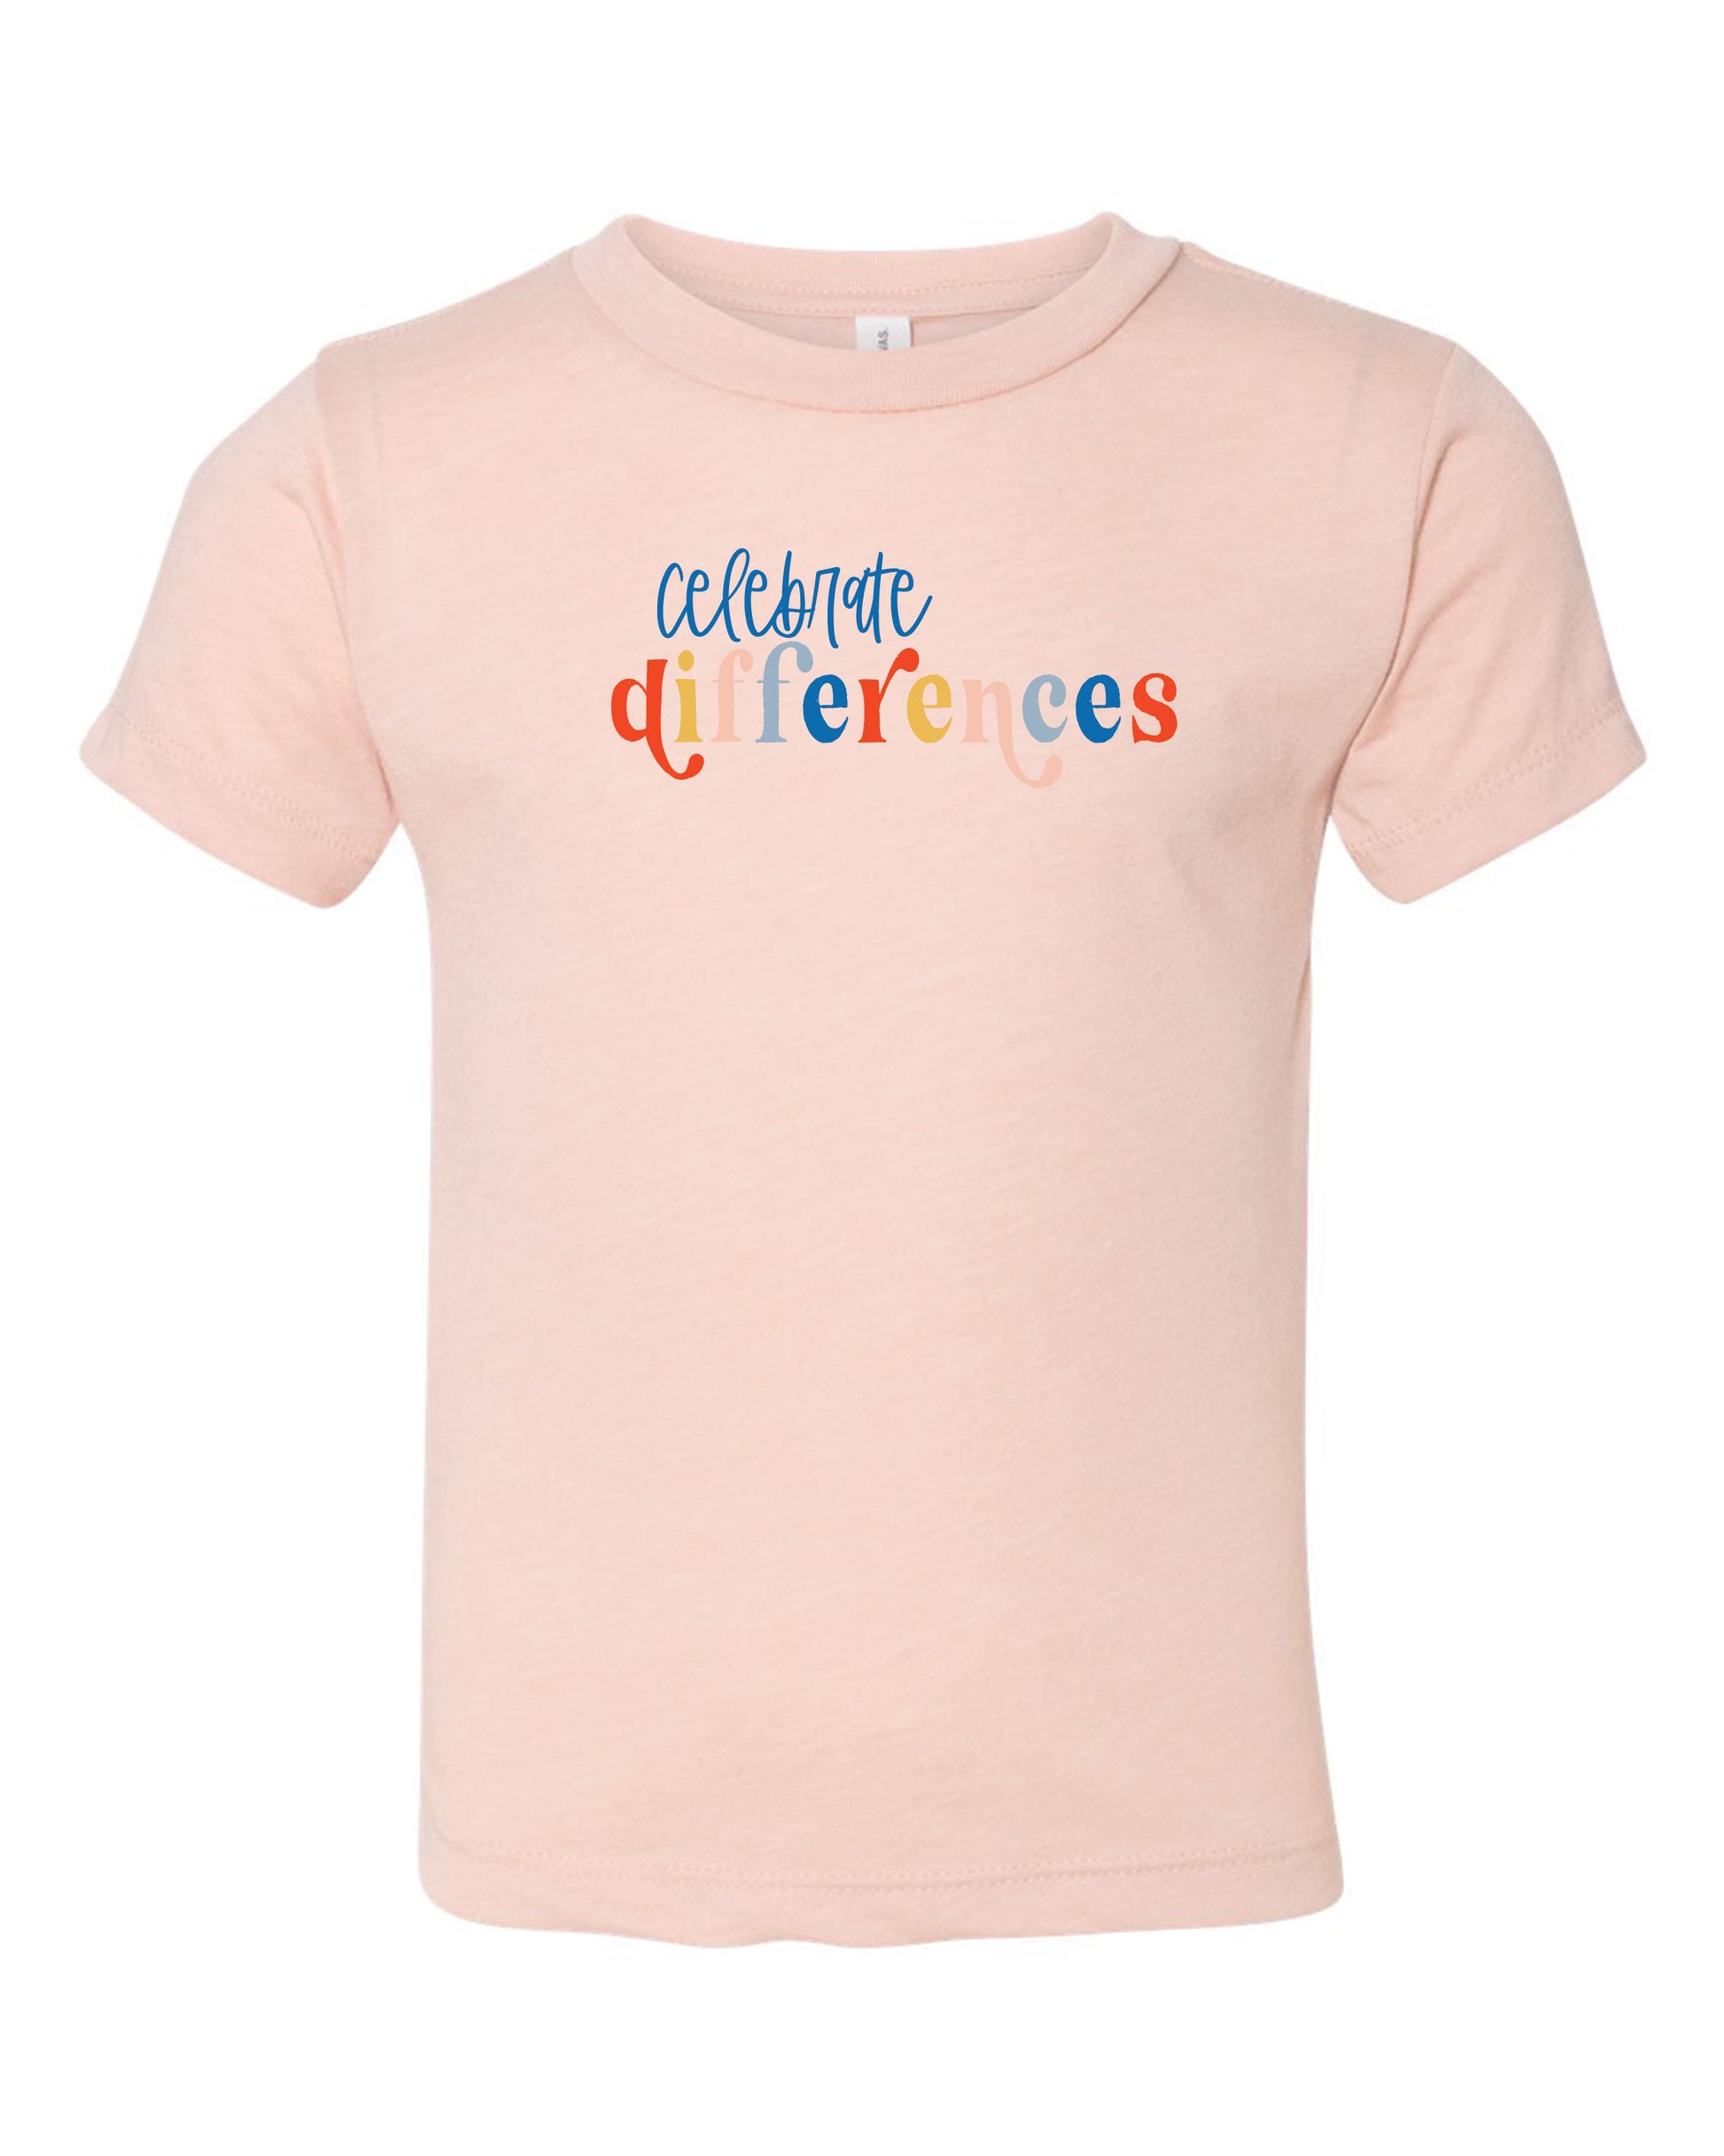 Celebrate Differences | Kids Tee-Kids Tees-Sister Shirts-Sister Shirts, Cute & Custom Tees for Mama & Littles in Trussville, Alabama.